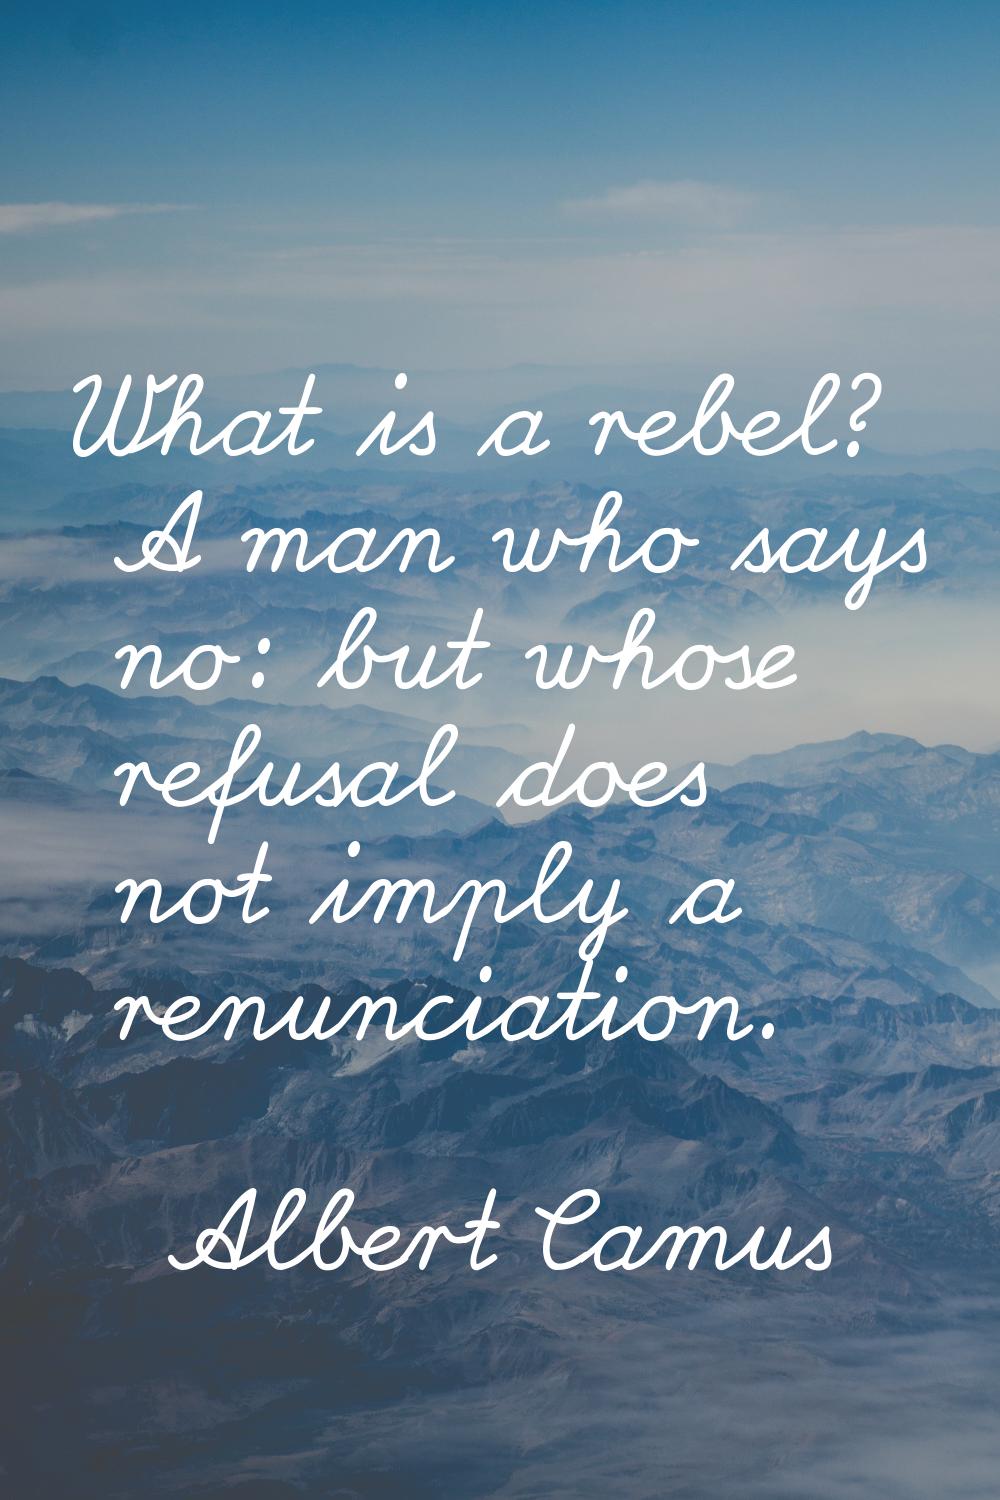 What is a rebel? A man who says no: but whose refusal does not imply a renunciation.